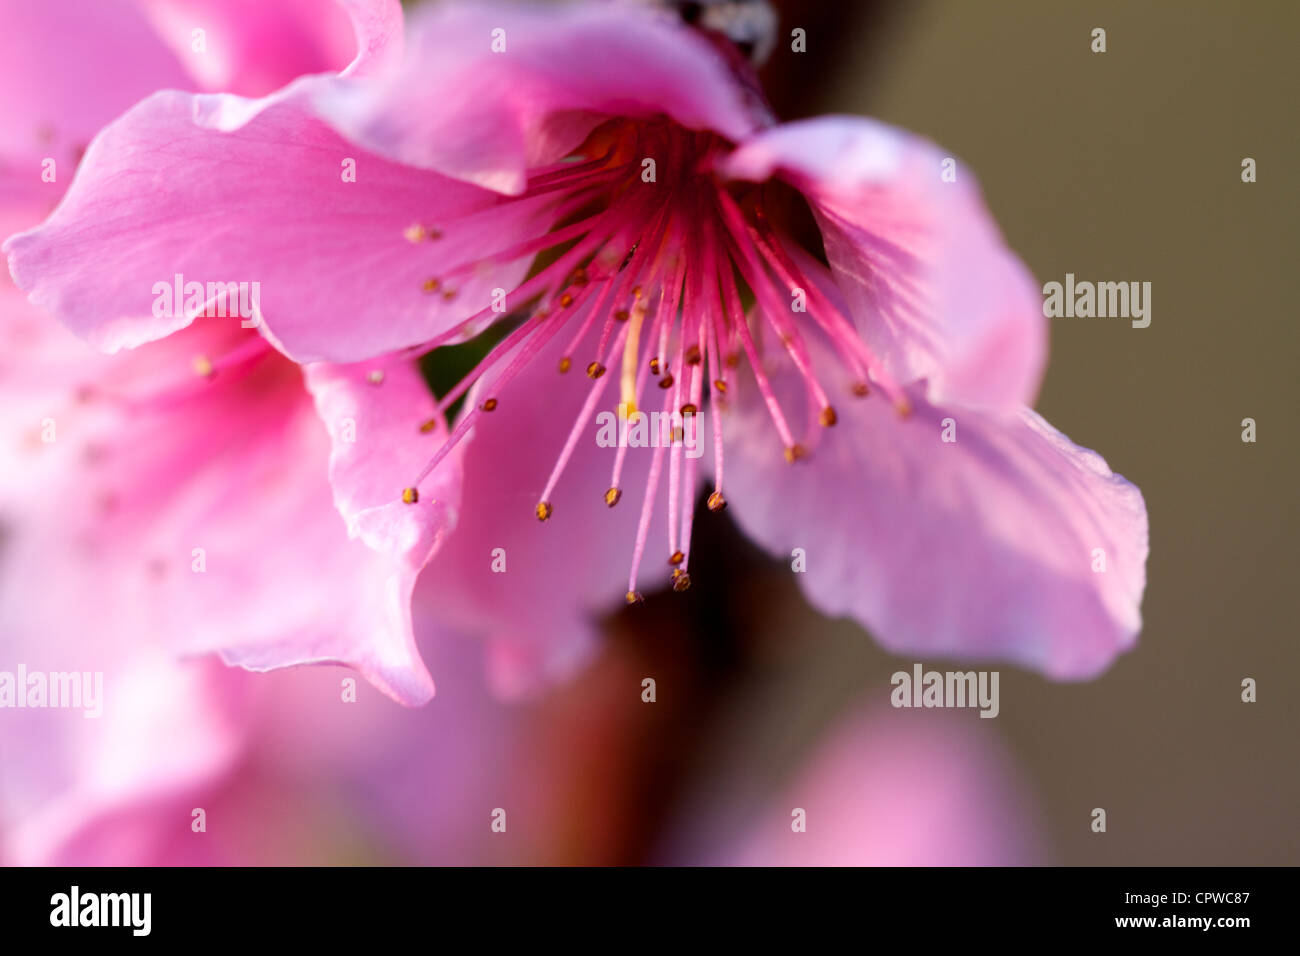 Spring greetings with peach blossoms Stock Photo